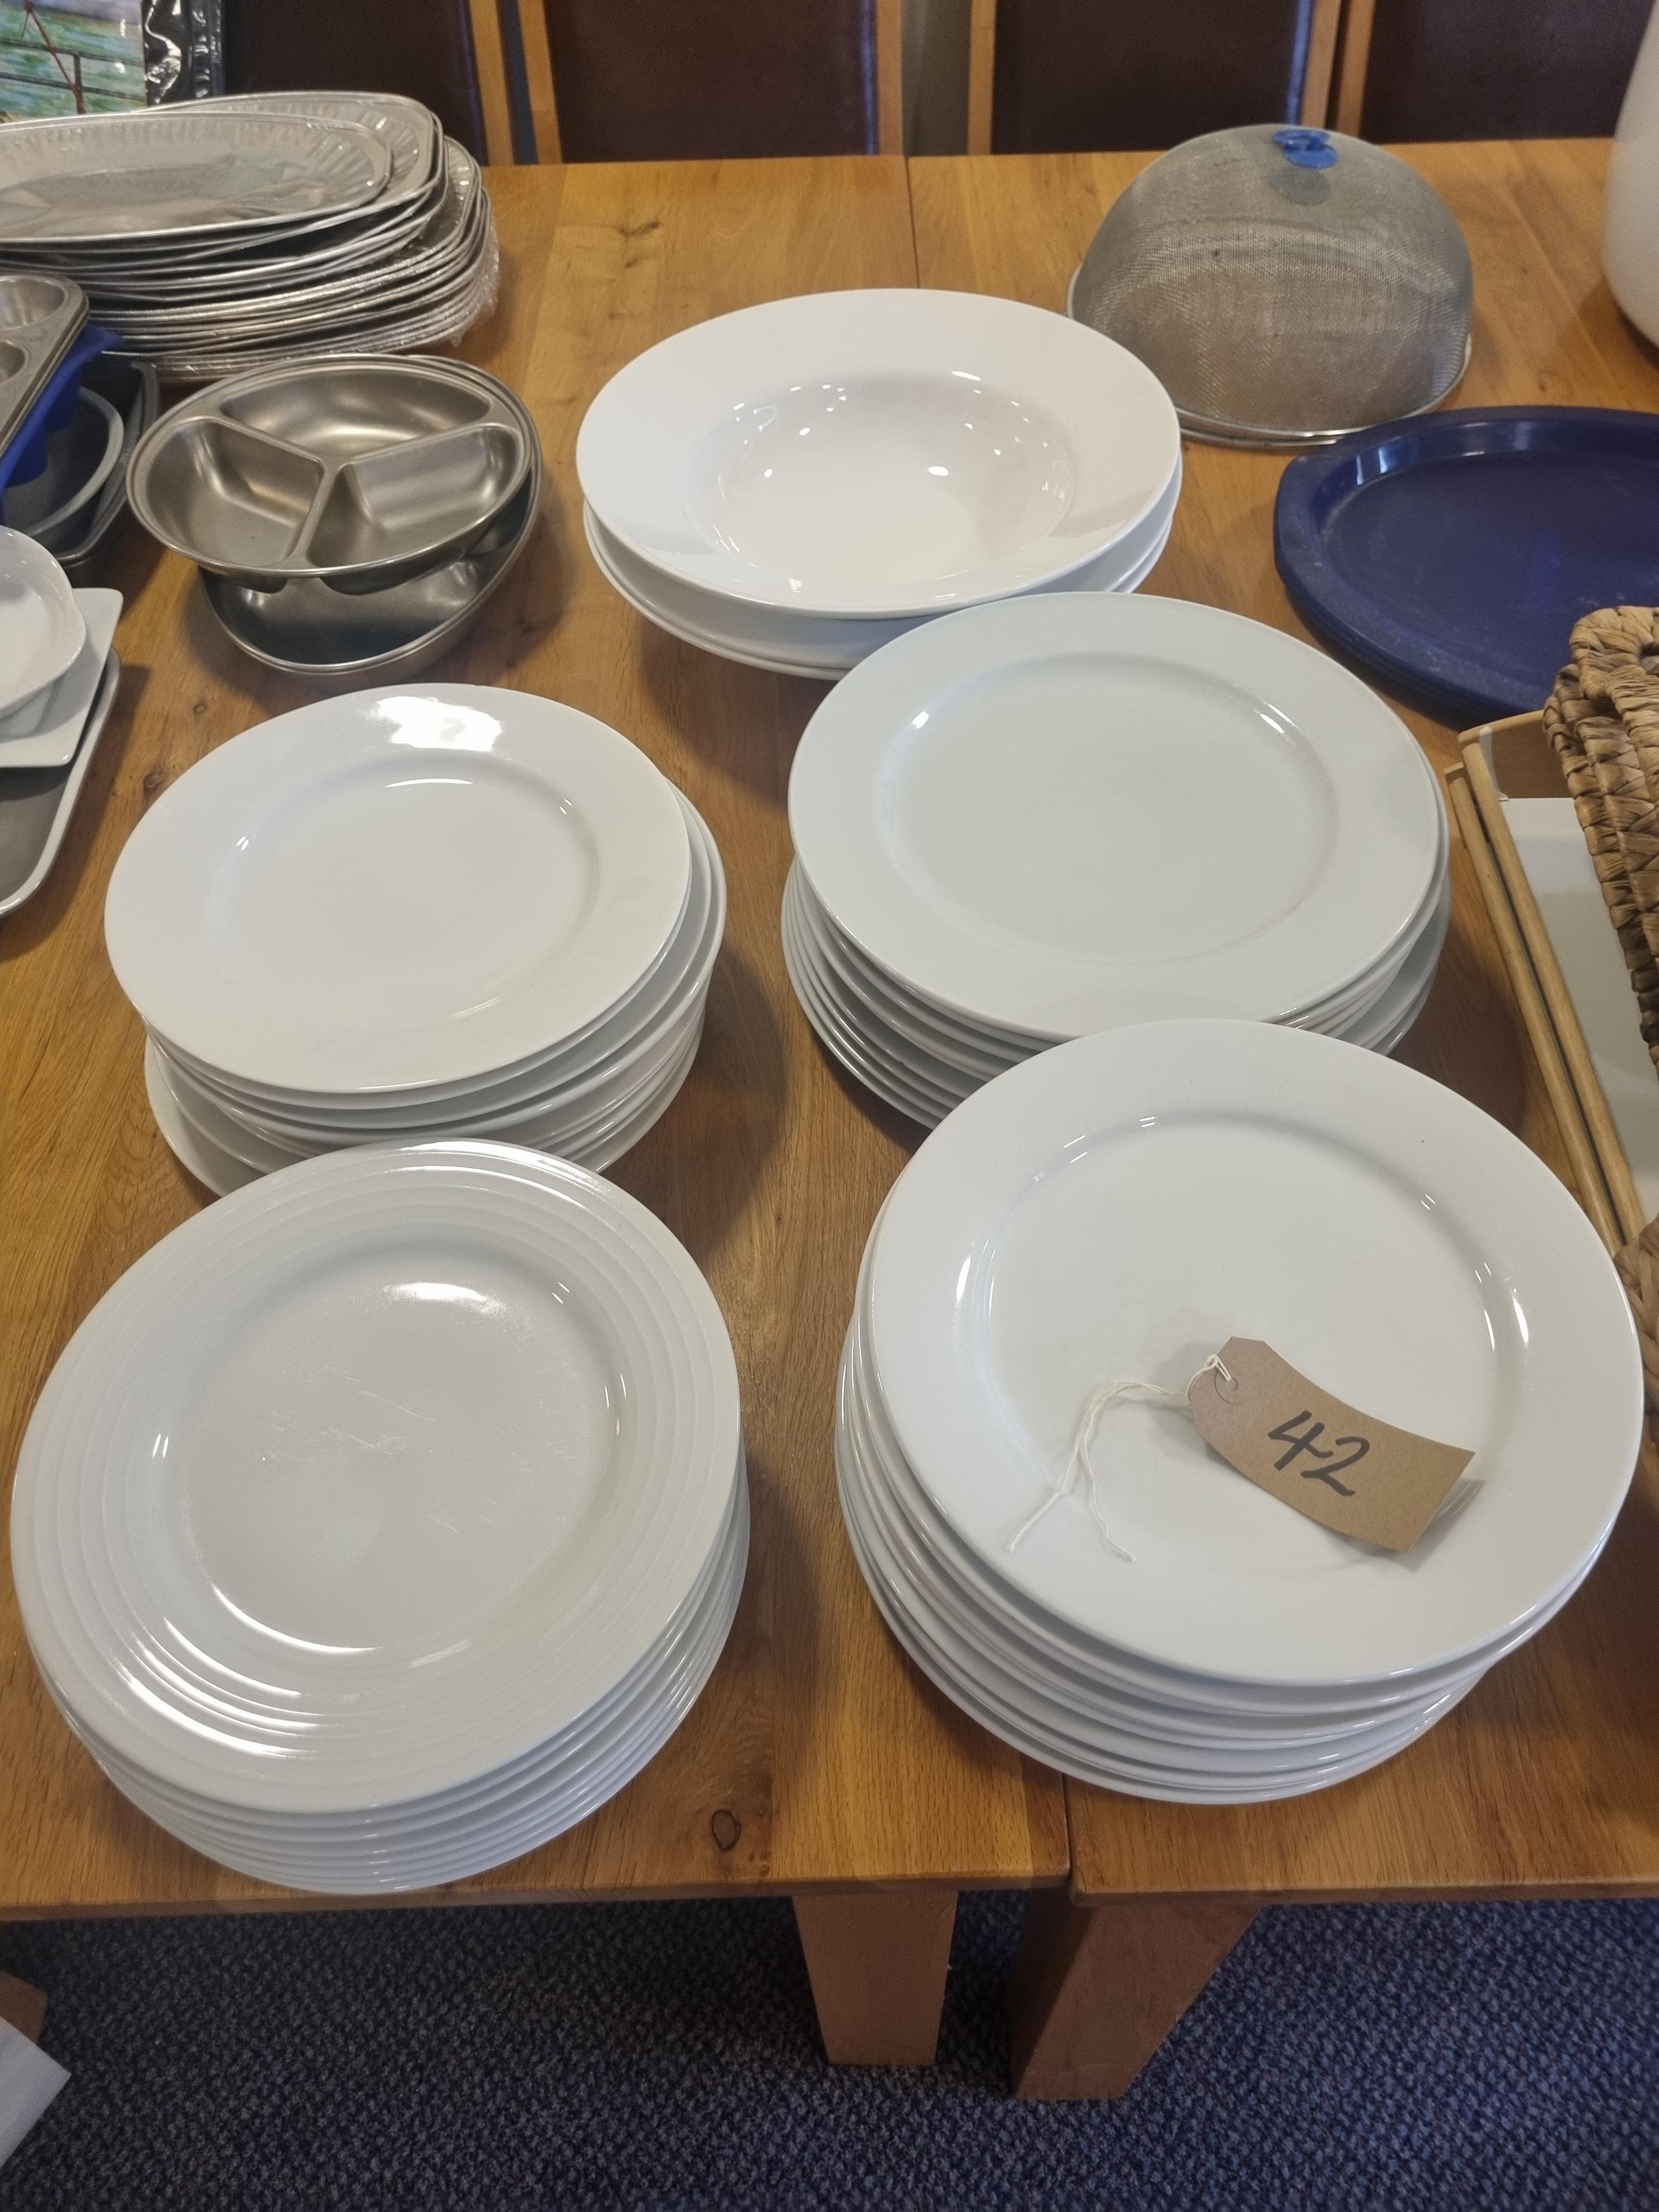 Large Quantity Of White Plates Comprising Of 10.5" 12" and 12.5" Plates and 3 X Large White